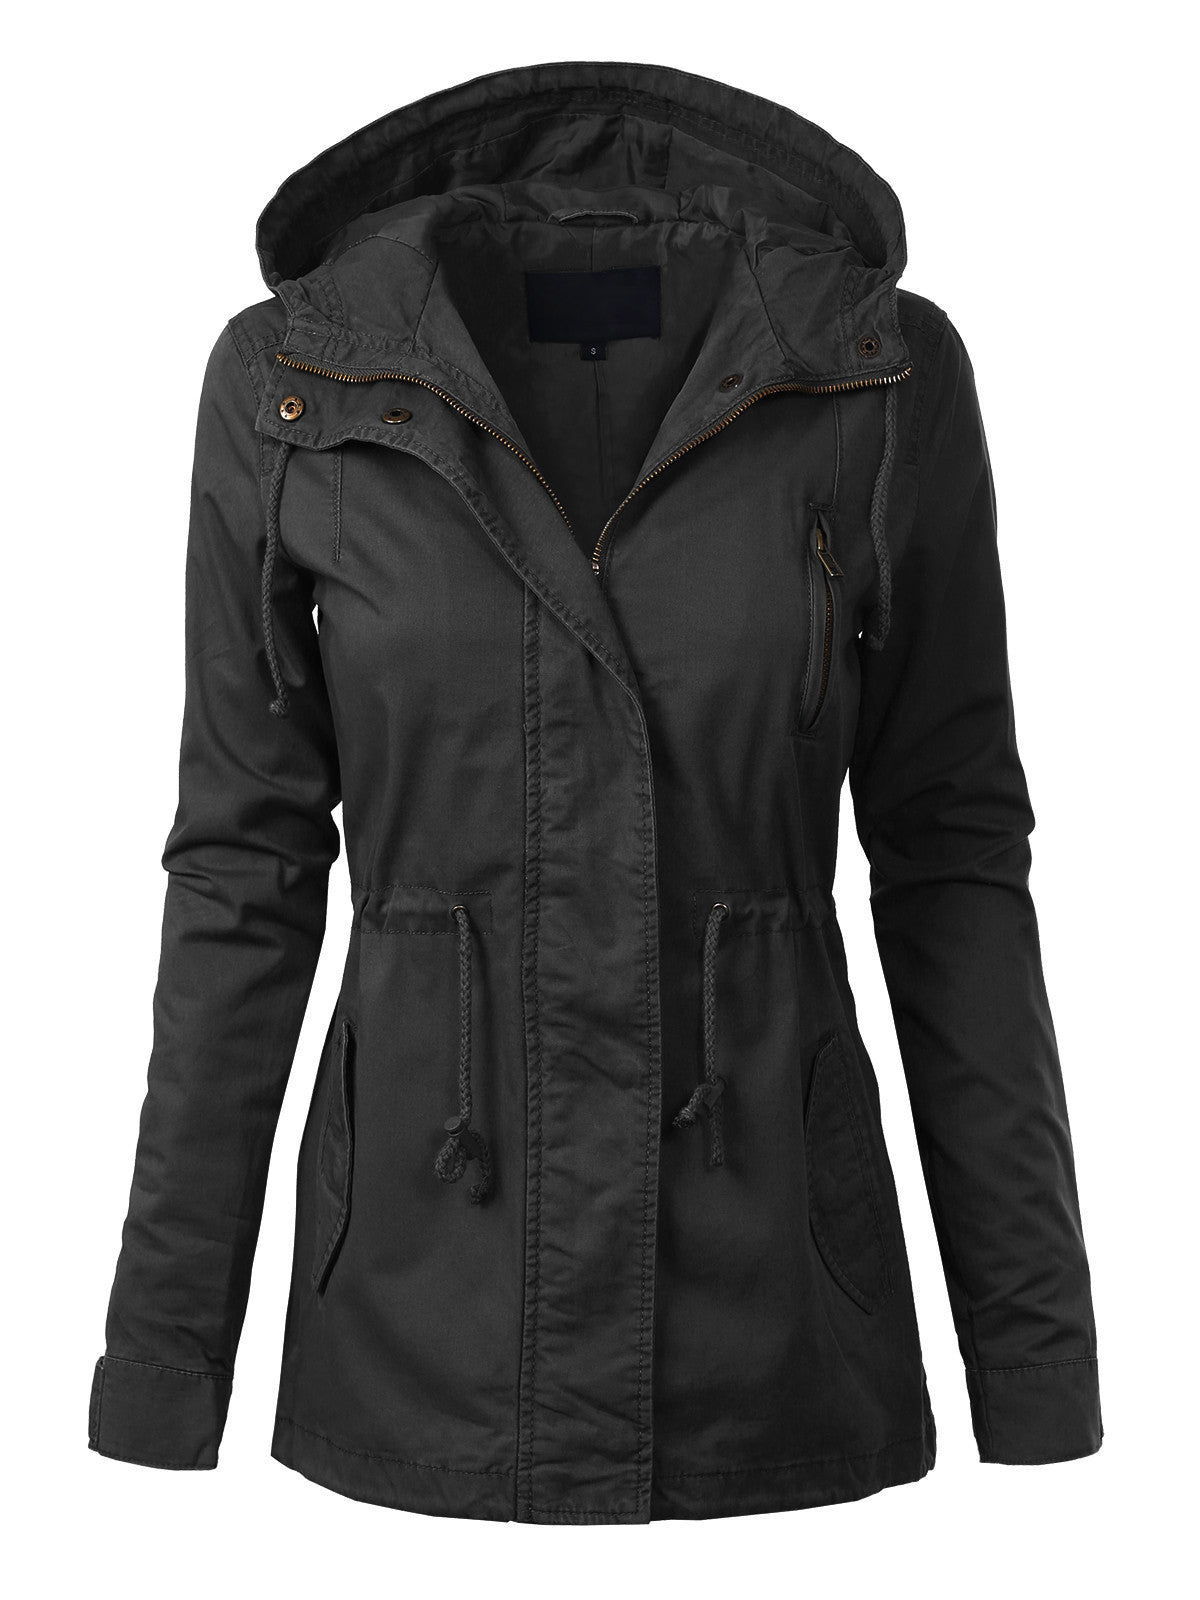 MixMatchy Women’s Casual Anorak Military Utility Jacket With Hoodie